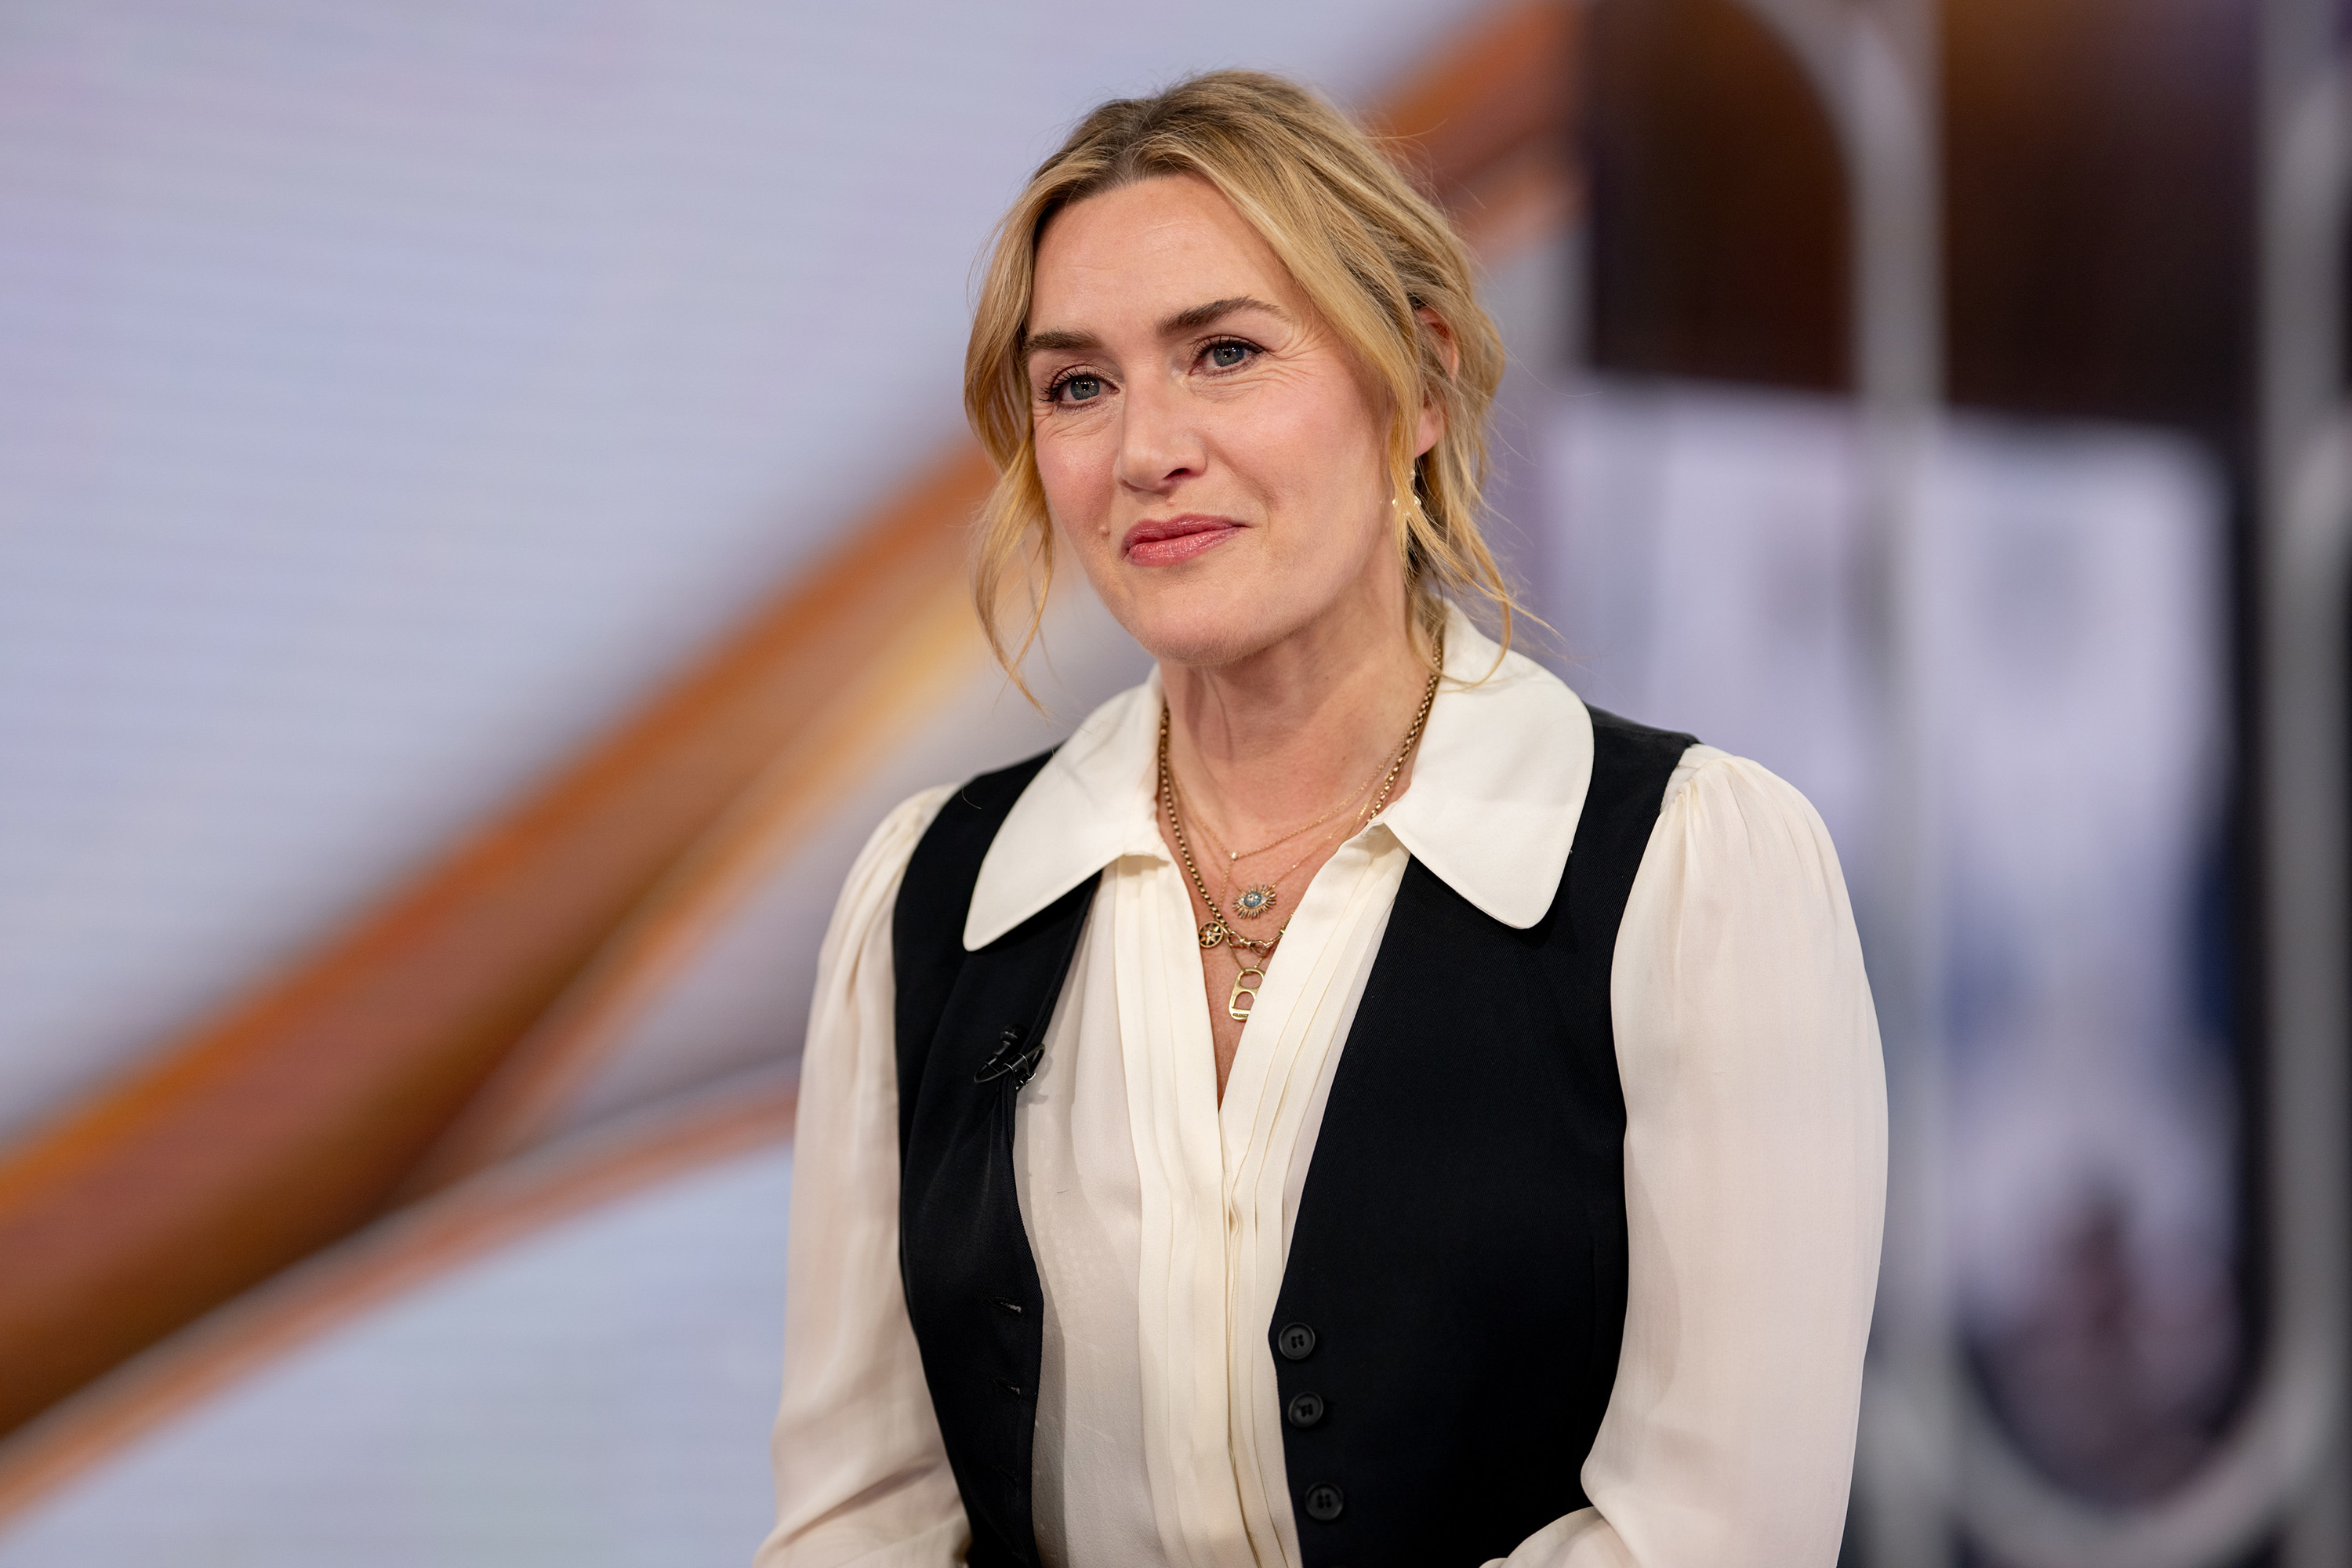 Kate Winslet in a vest and long-sleeved blouse smiles during an interview